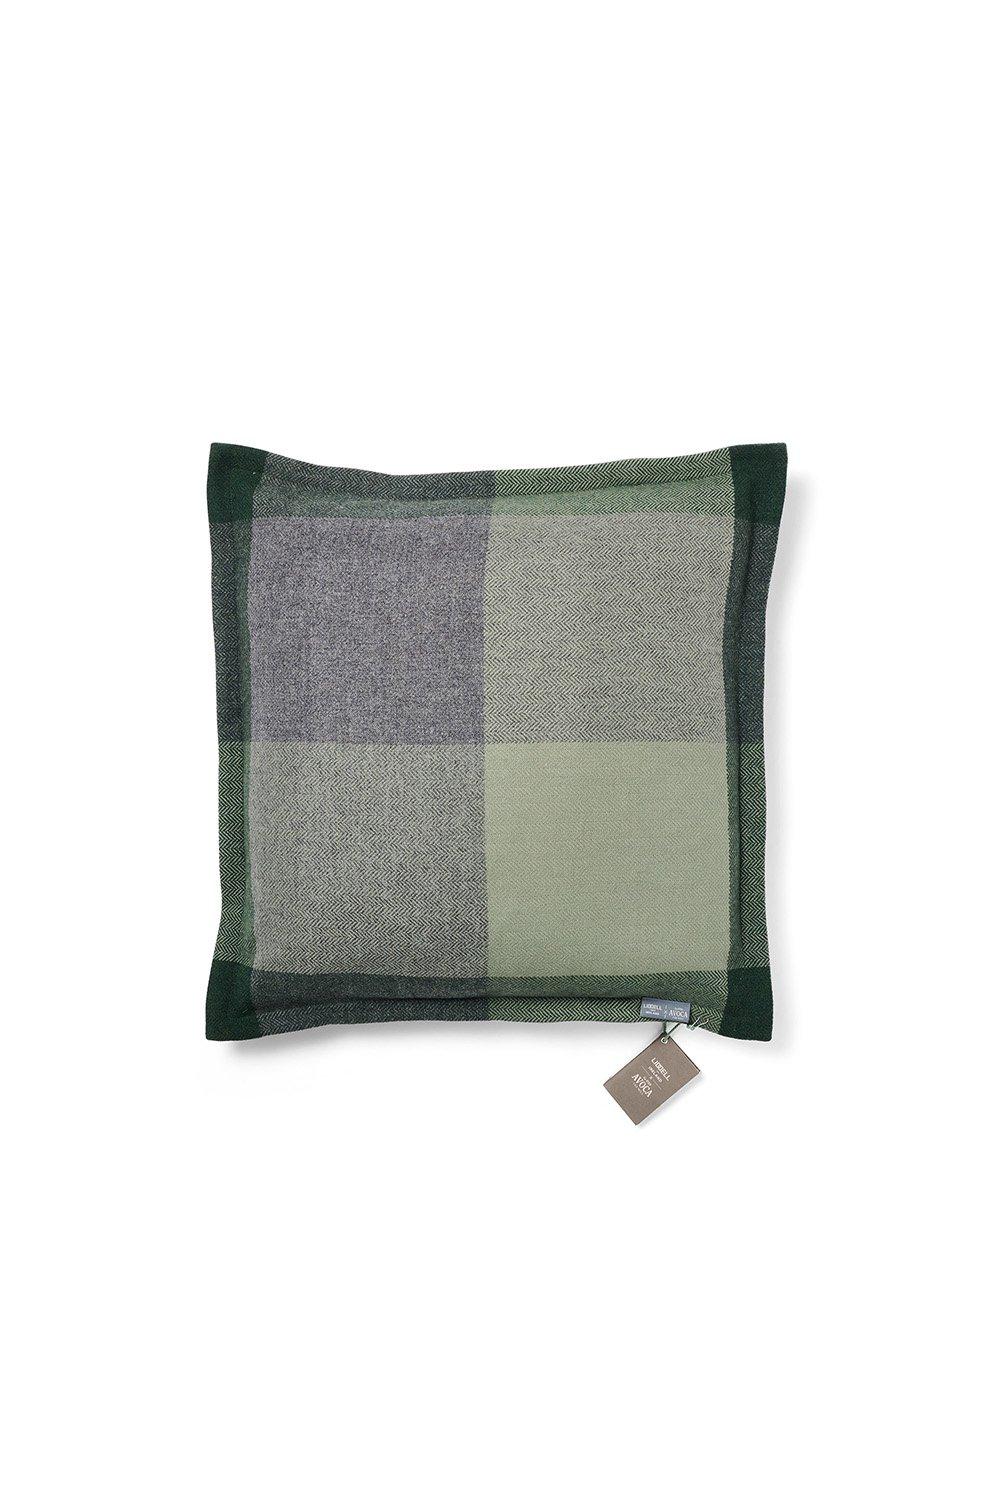 Lambswool Bistro Check Cushion